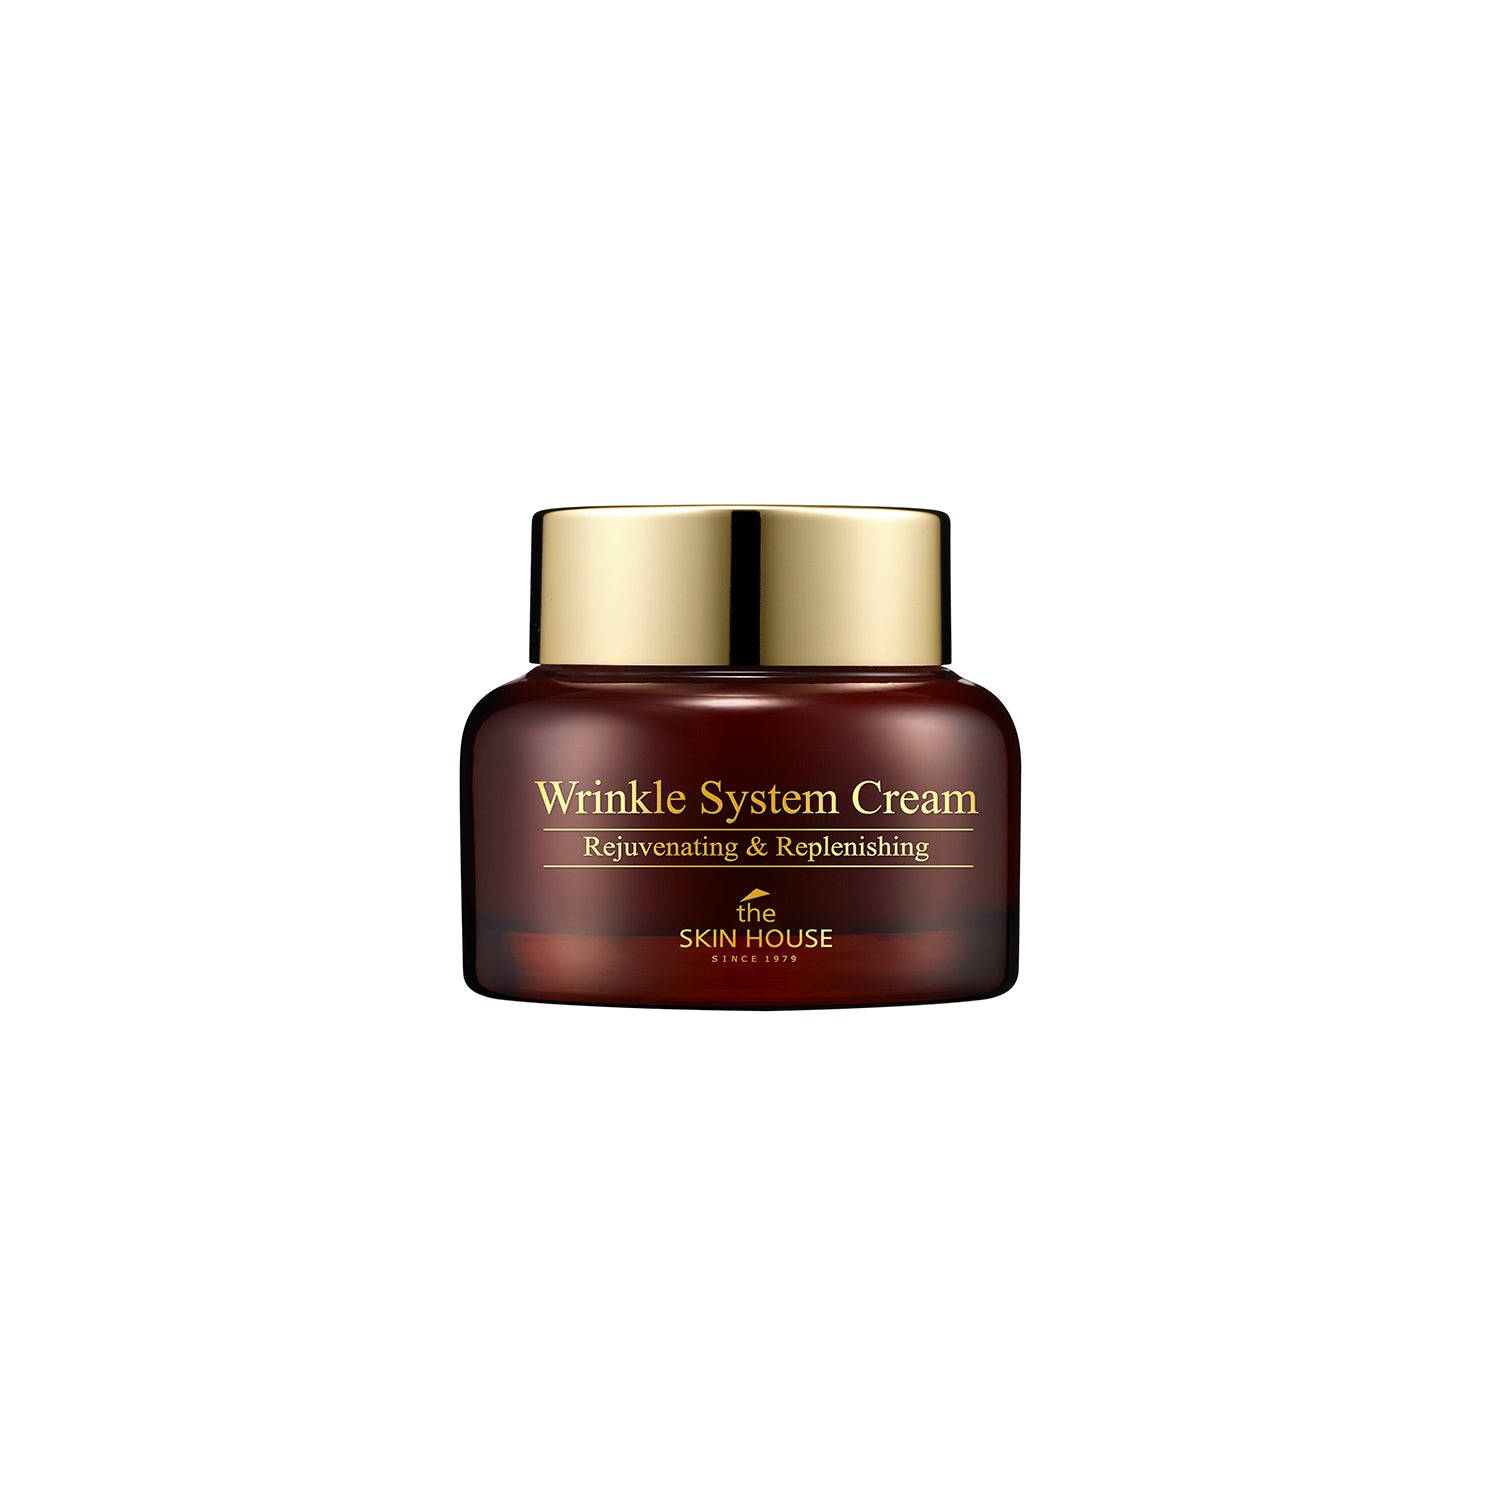 THE SKIN HOUSE WRINKLE SYSTEM CREAM